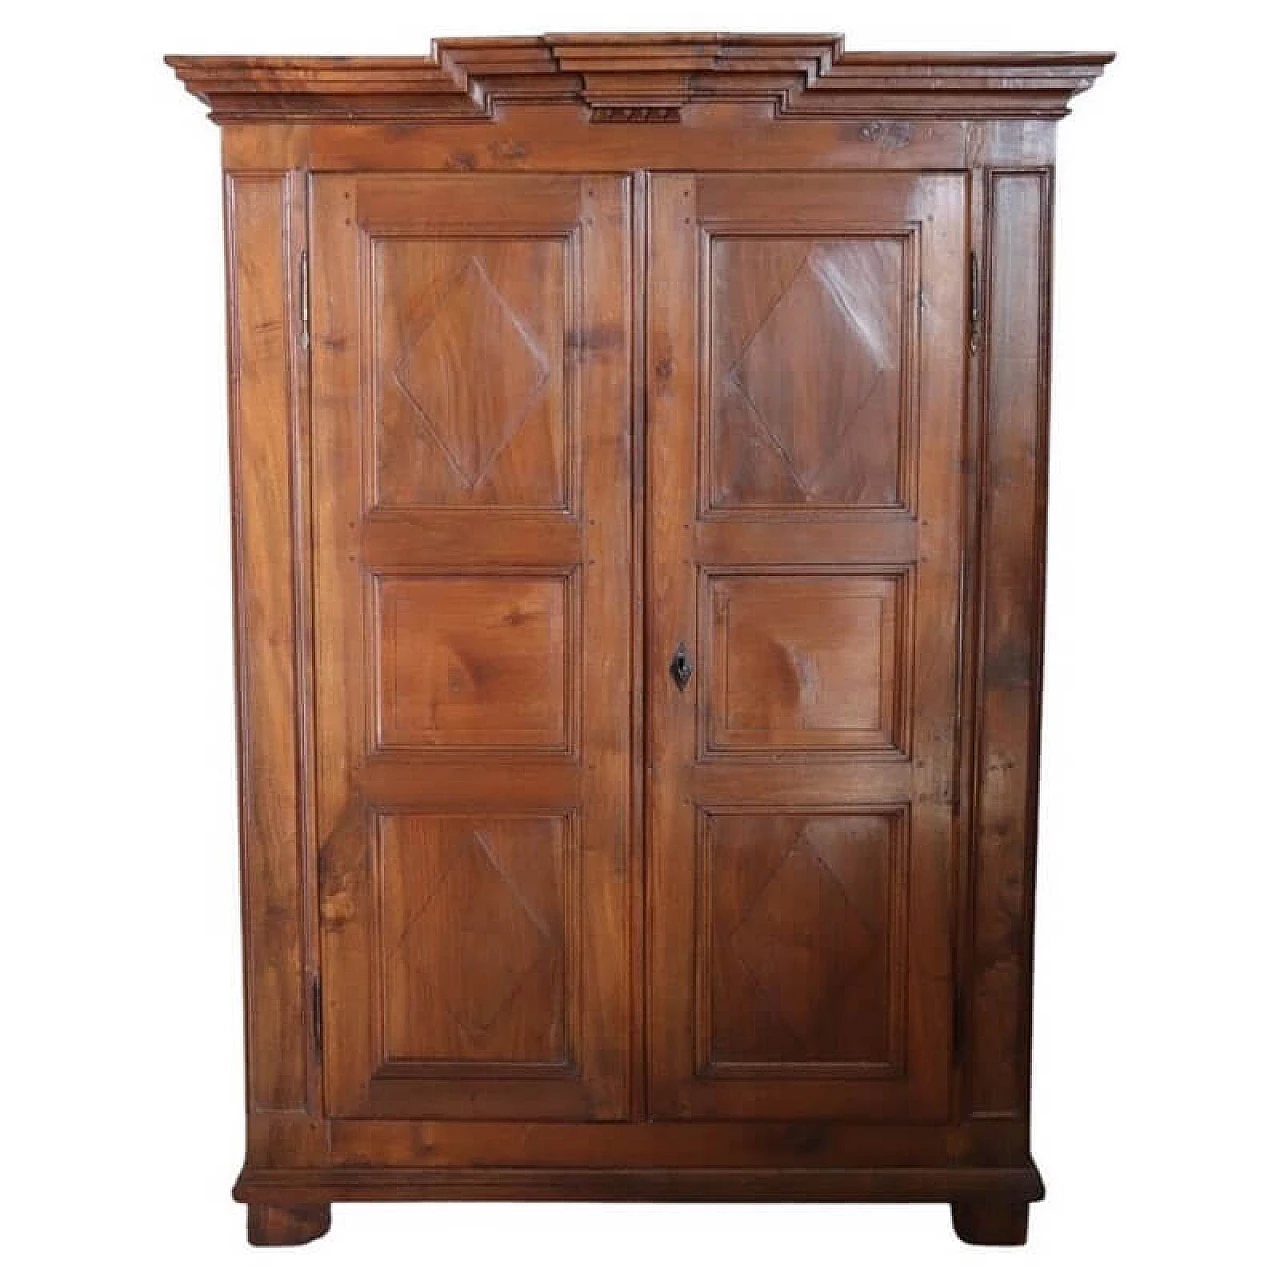 Solid walnut wardrobe with two doors, mid-18th century 1